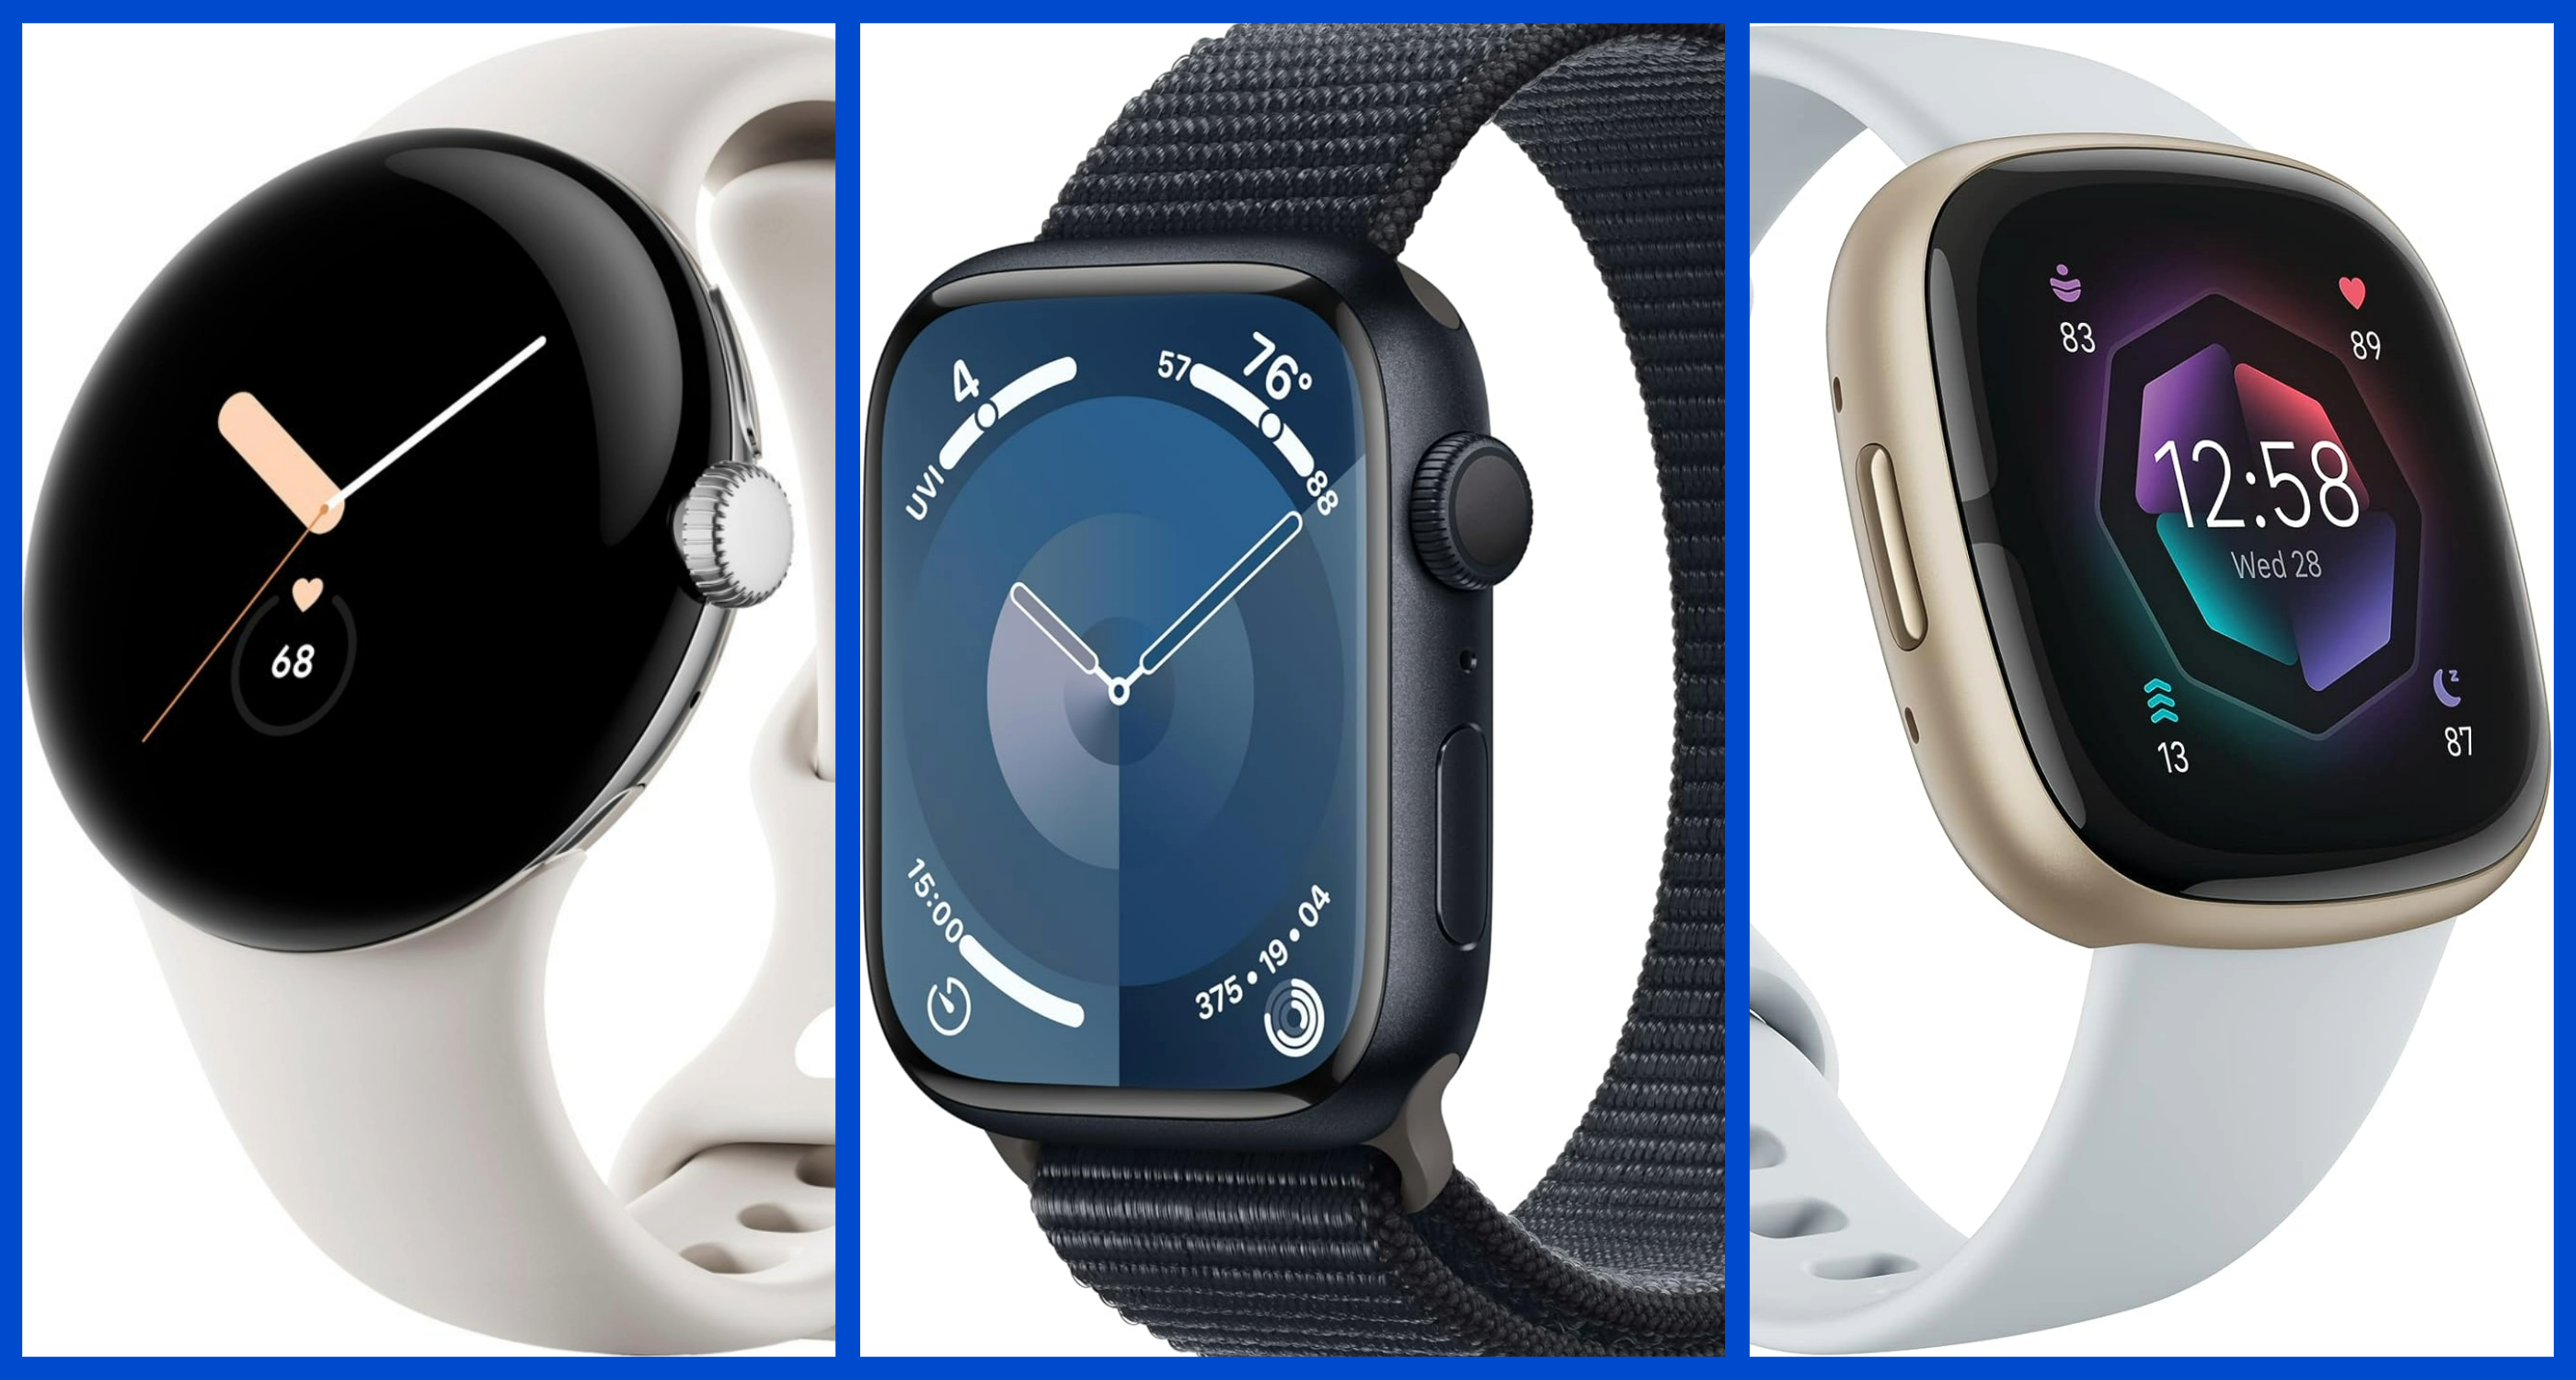 Last chance smartwatch deals: Save up to 30% on Apple, Samsung and Google watches at Amazon's Spring Sale